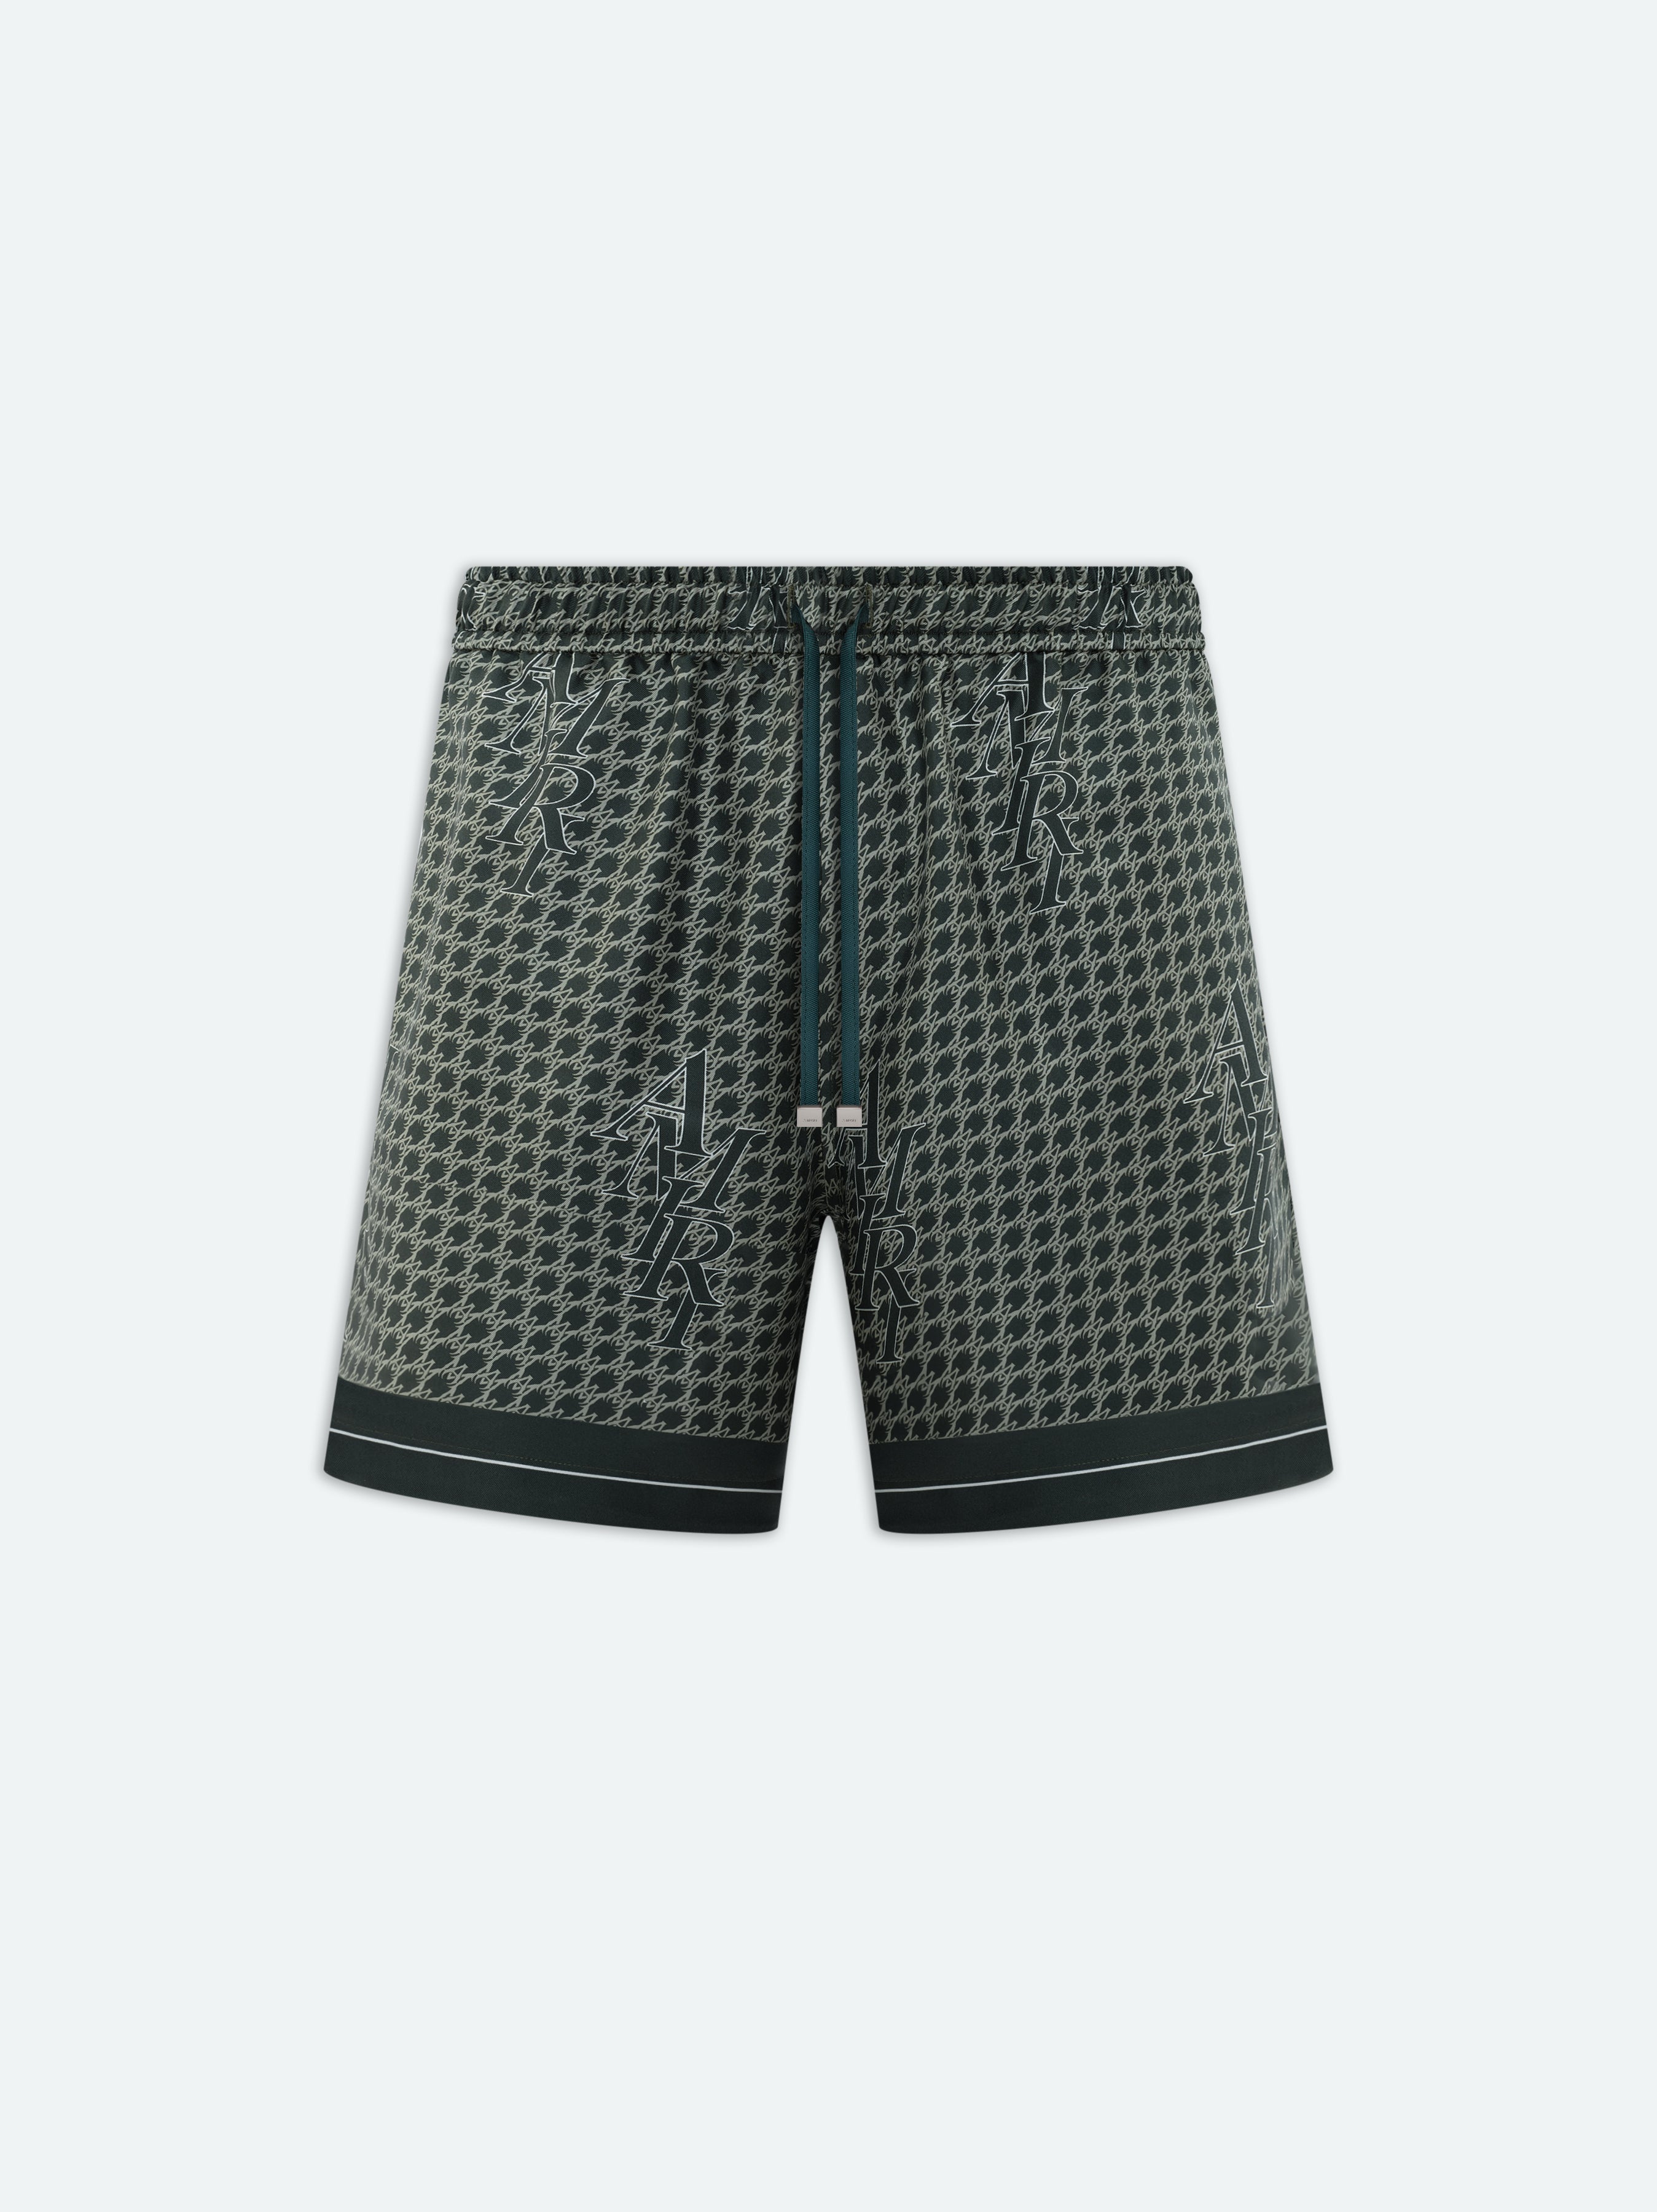 Product STAGGARD AMIRI HOUNDSTOOTH SILK SHORT - Rain Forest featured image